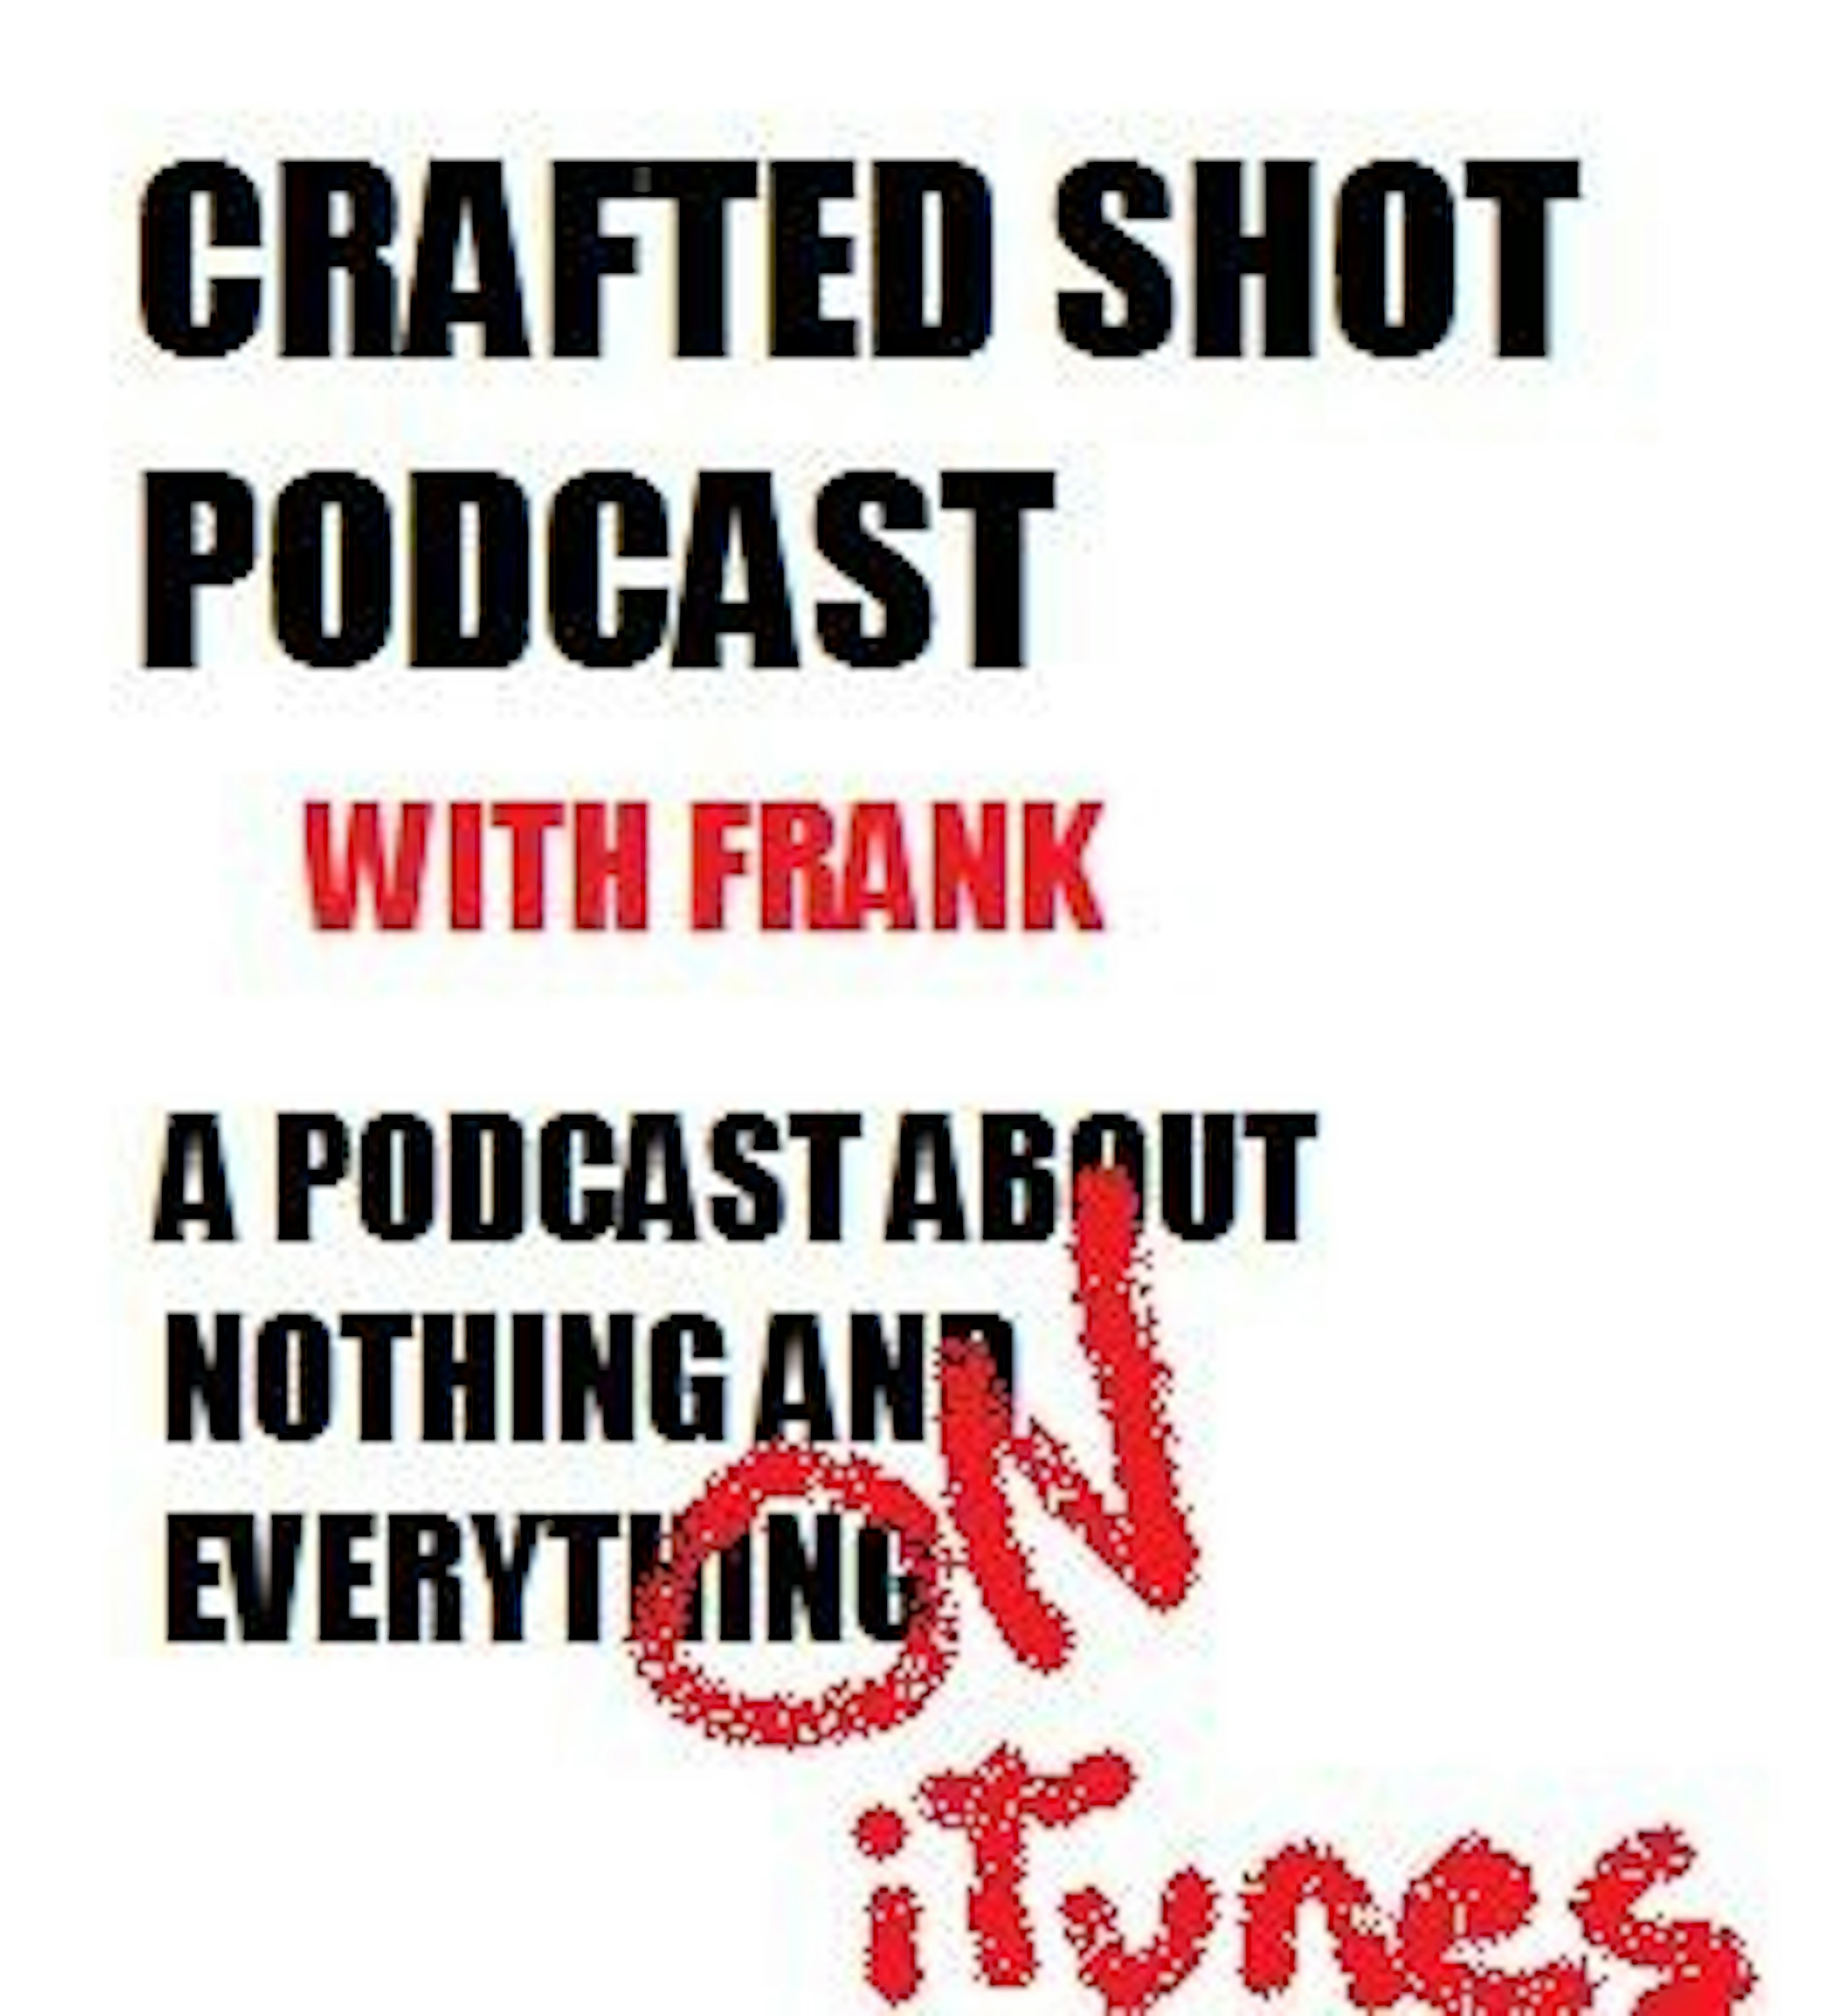 Crafted Shot Podcasts